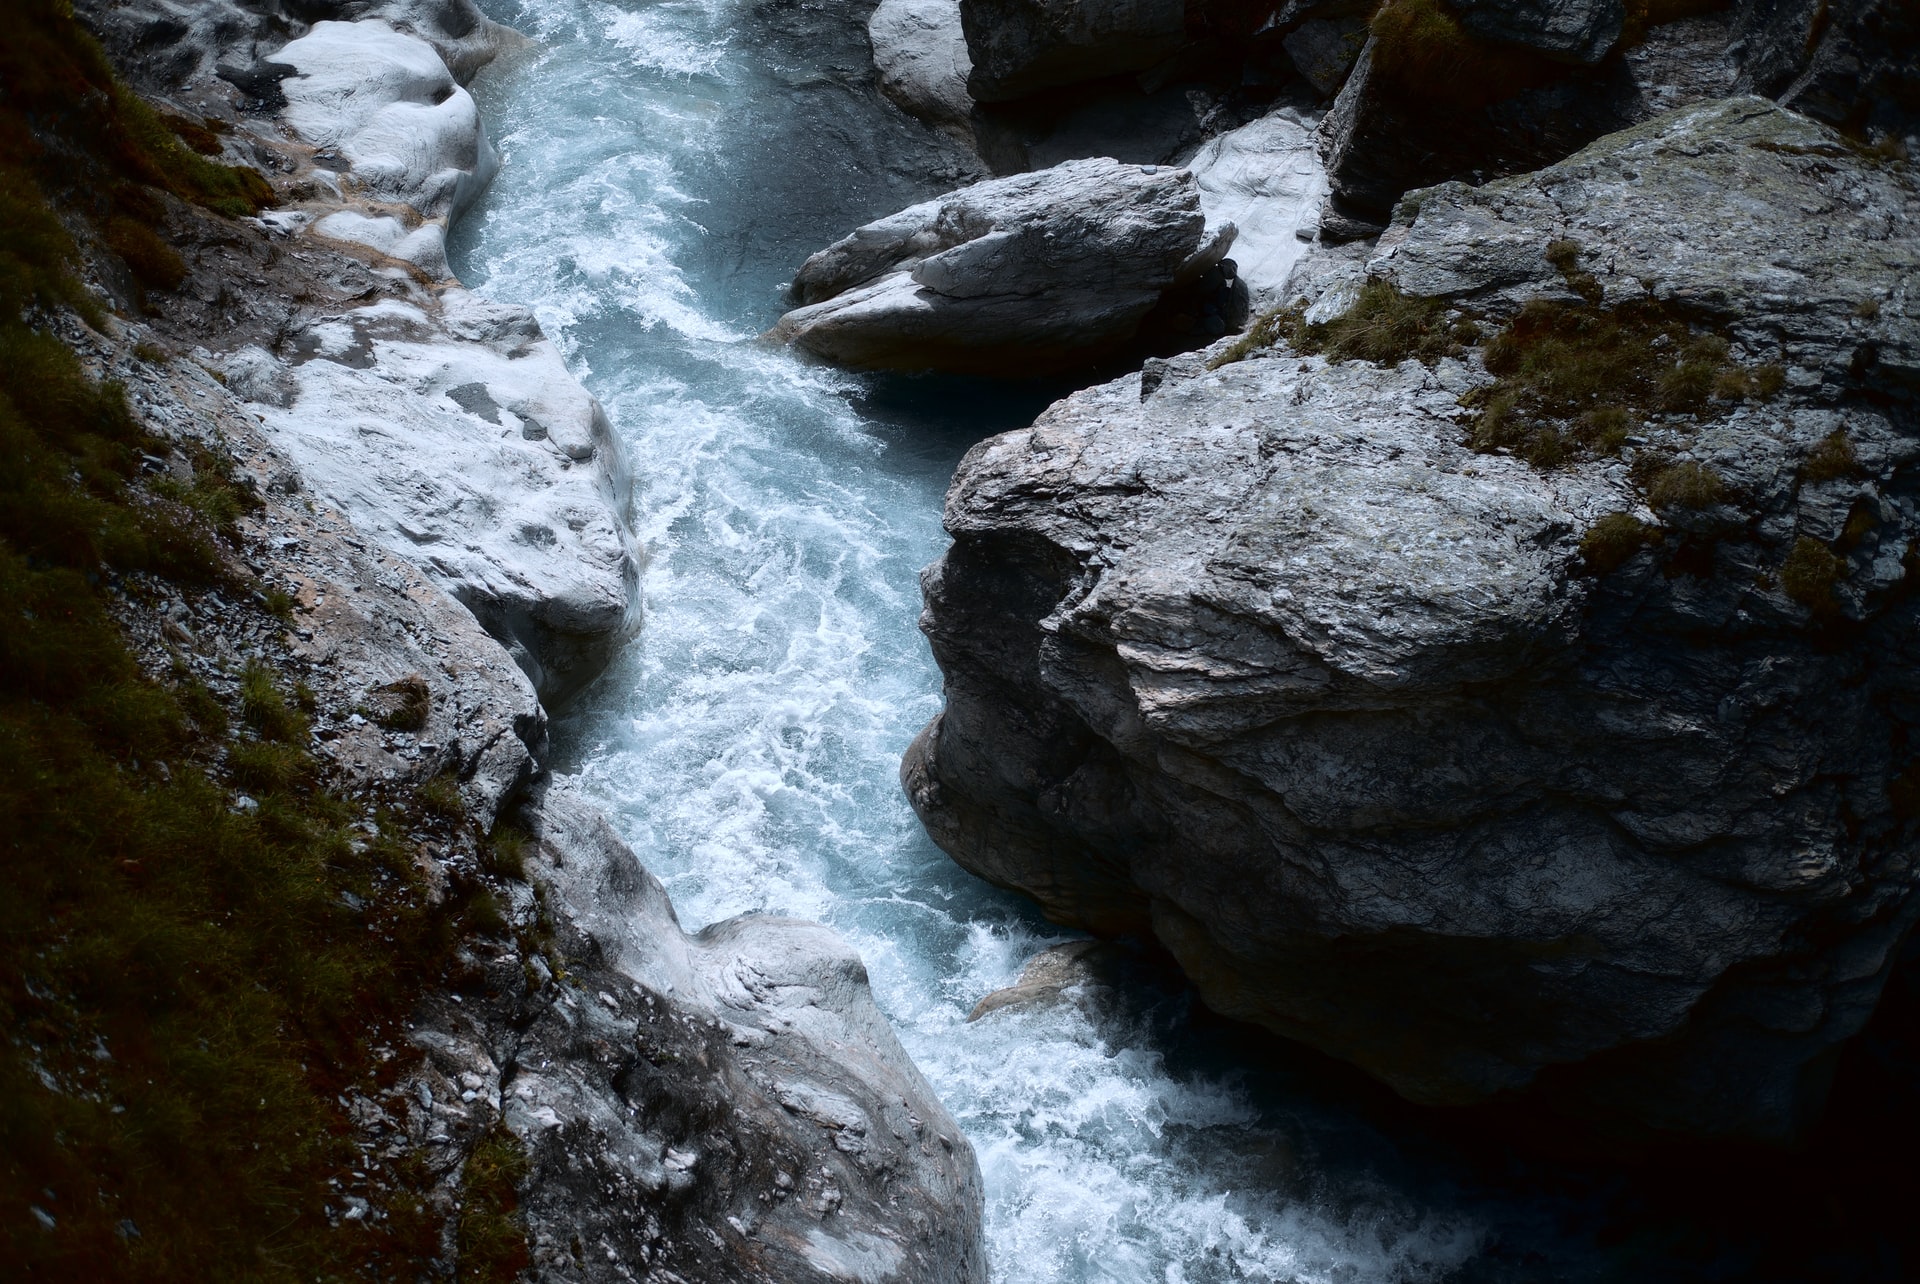 A nature scene with a rushing river flowing between rocks.